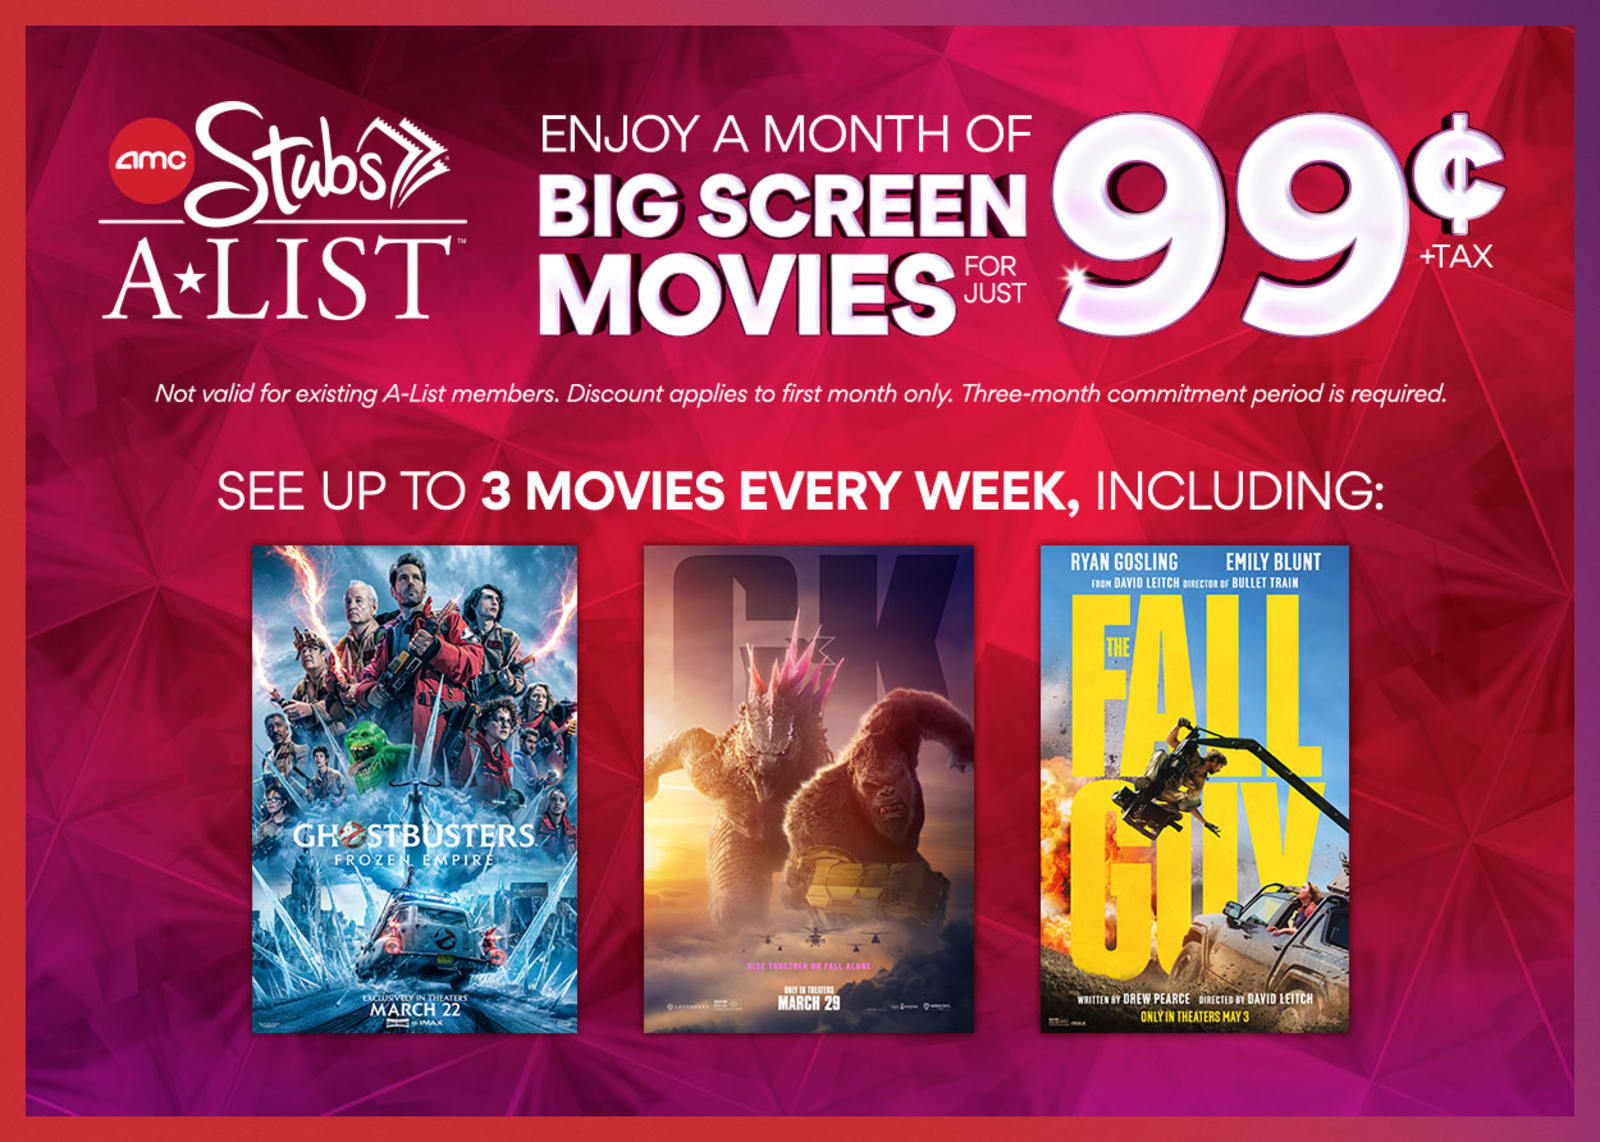 AMC Theatres: AMC Stubs A-List Membership for $0.99 for First Month (3-Months Required)